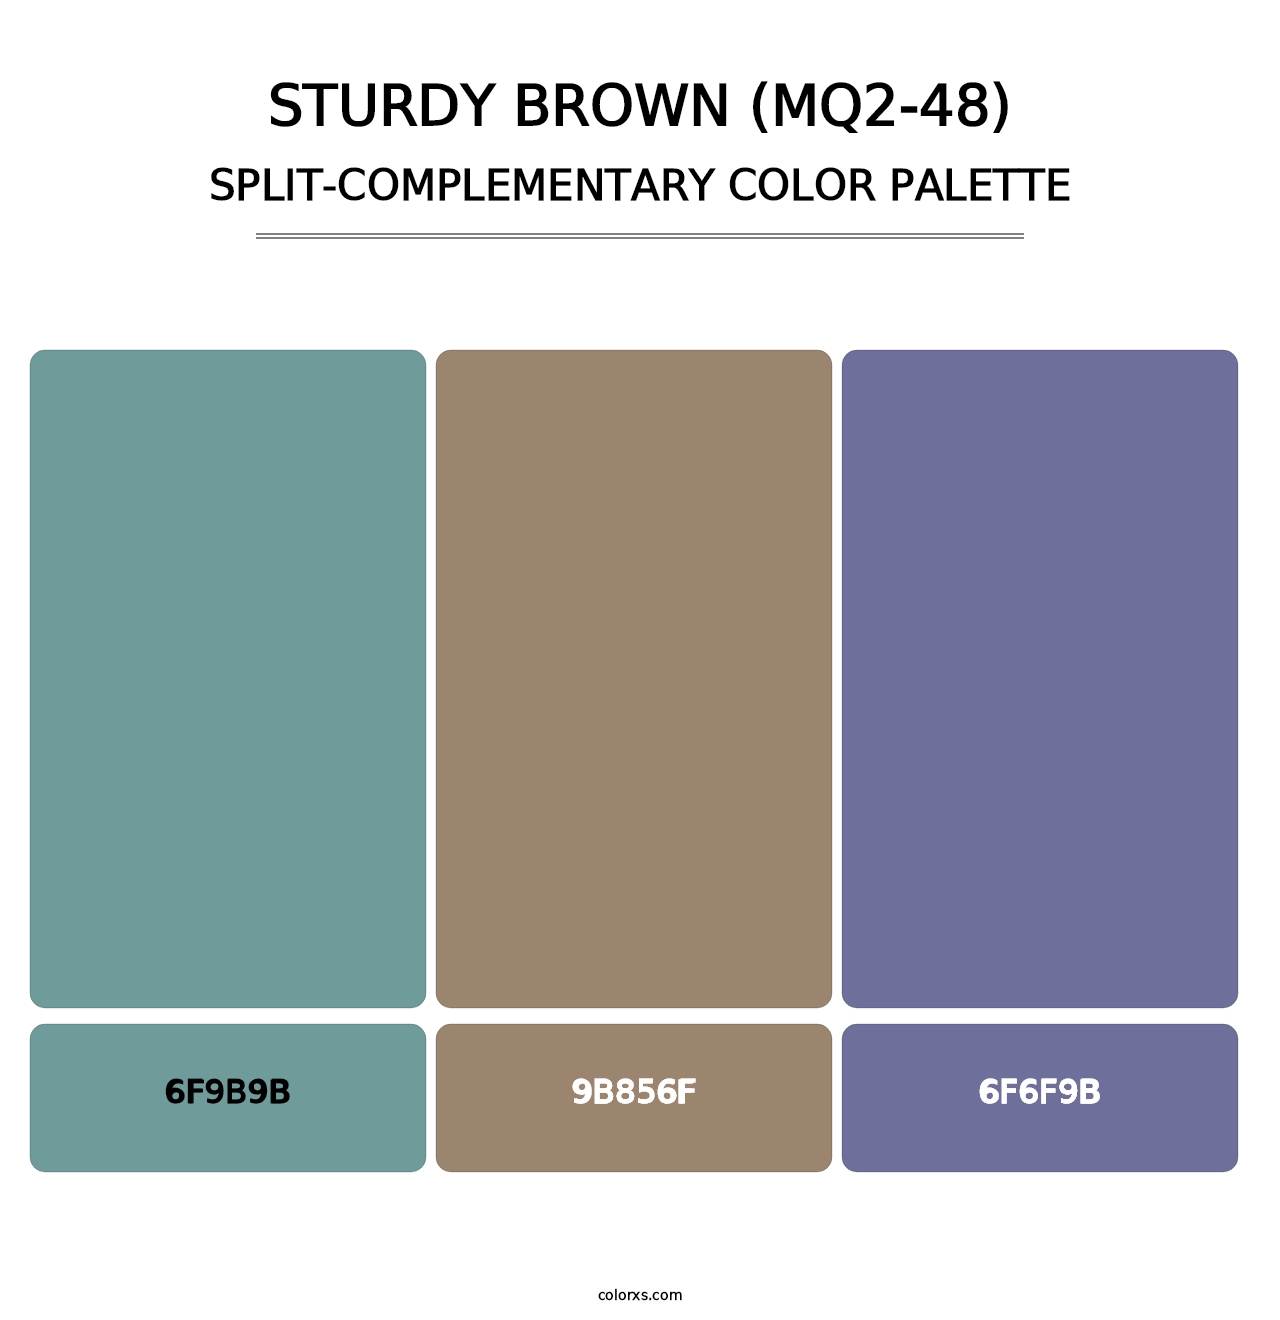 Sturdy Brown (MQ2-48) - Split-Complementary Color Palette